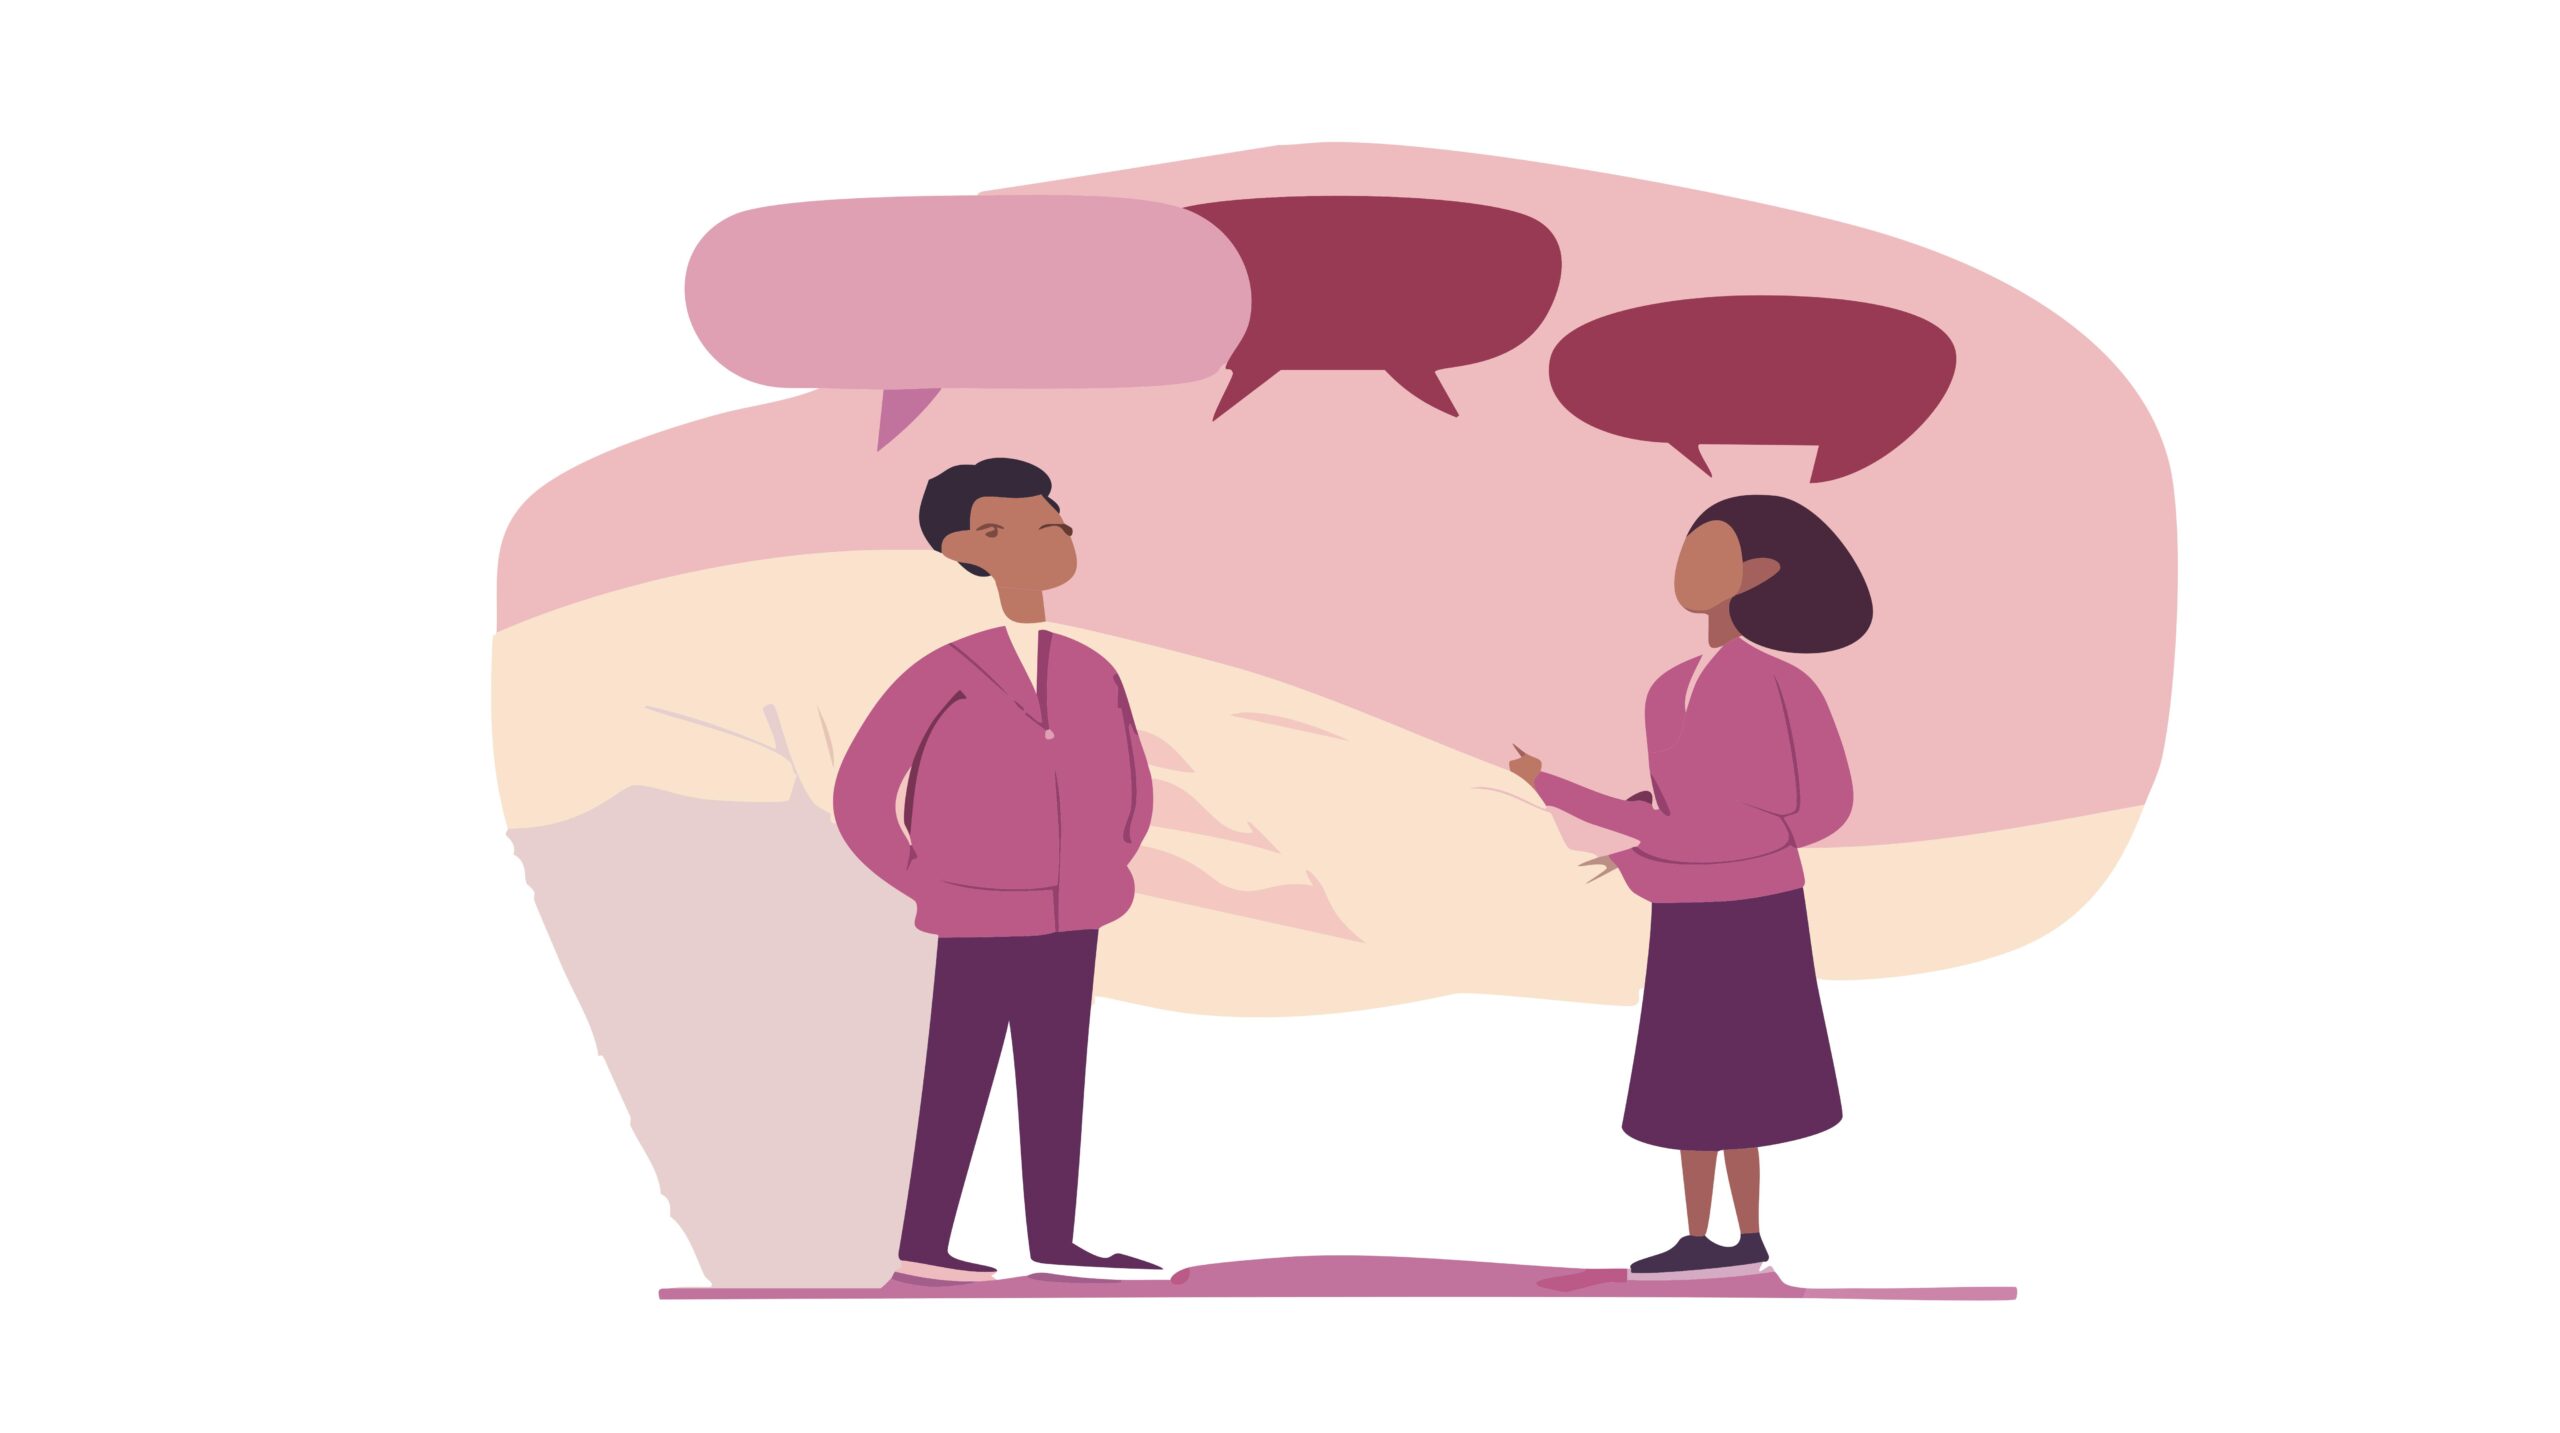 Digital illustration in purple and maroon of two people talking with speech bubbles.